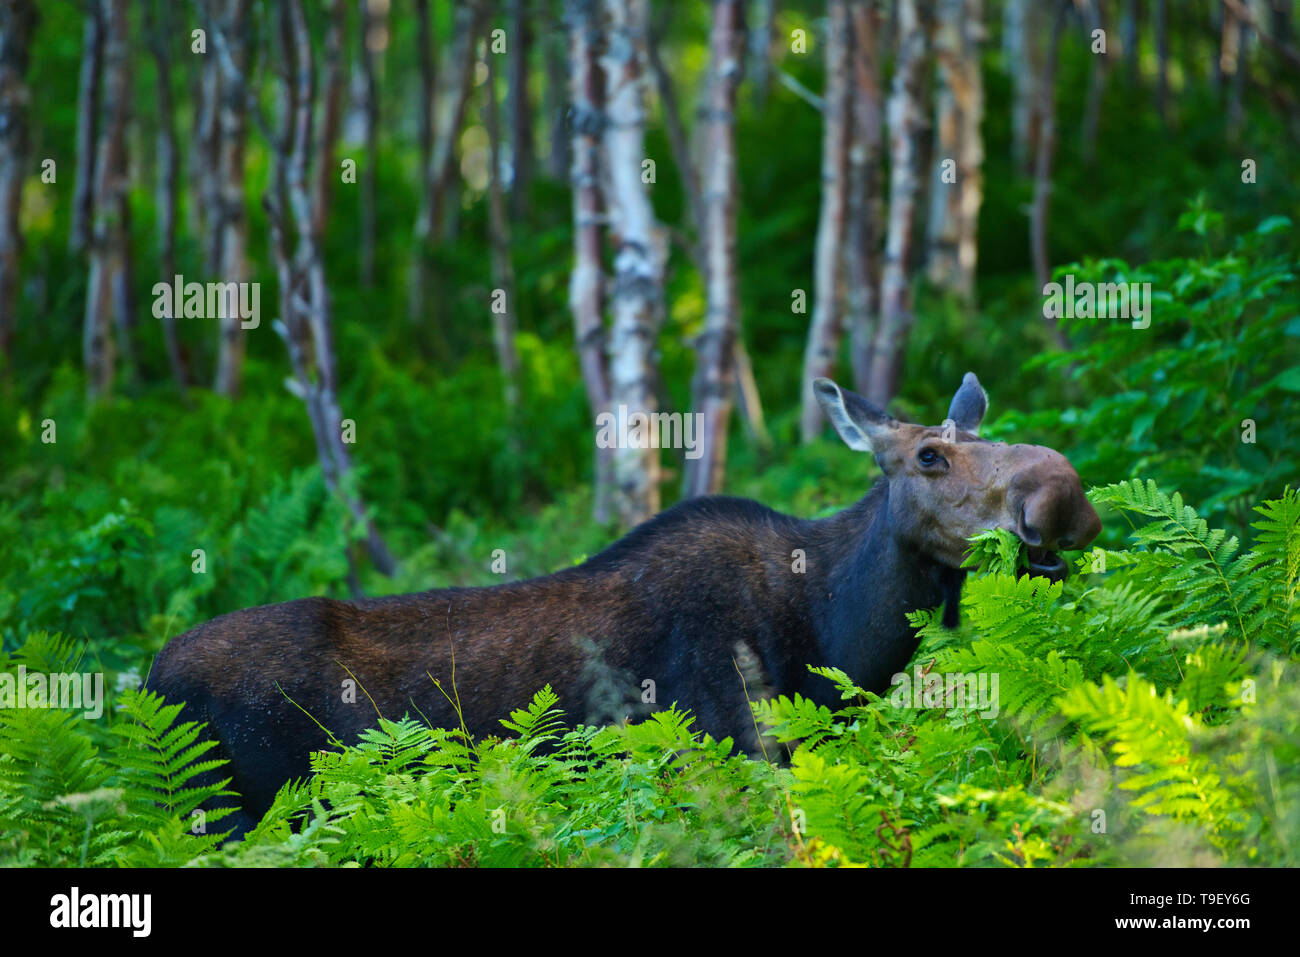 Moose (Alces alces) in the boreal forest, This is a provincial park and not a true Canadian national park Parc national de la Gaspésie Quebec Canada Stock Photo